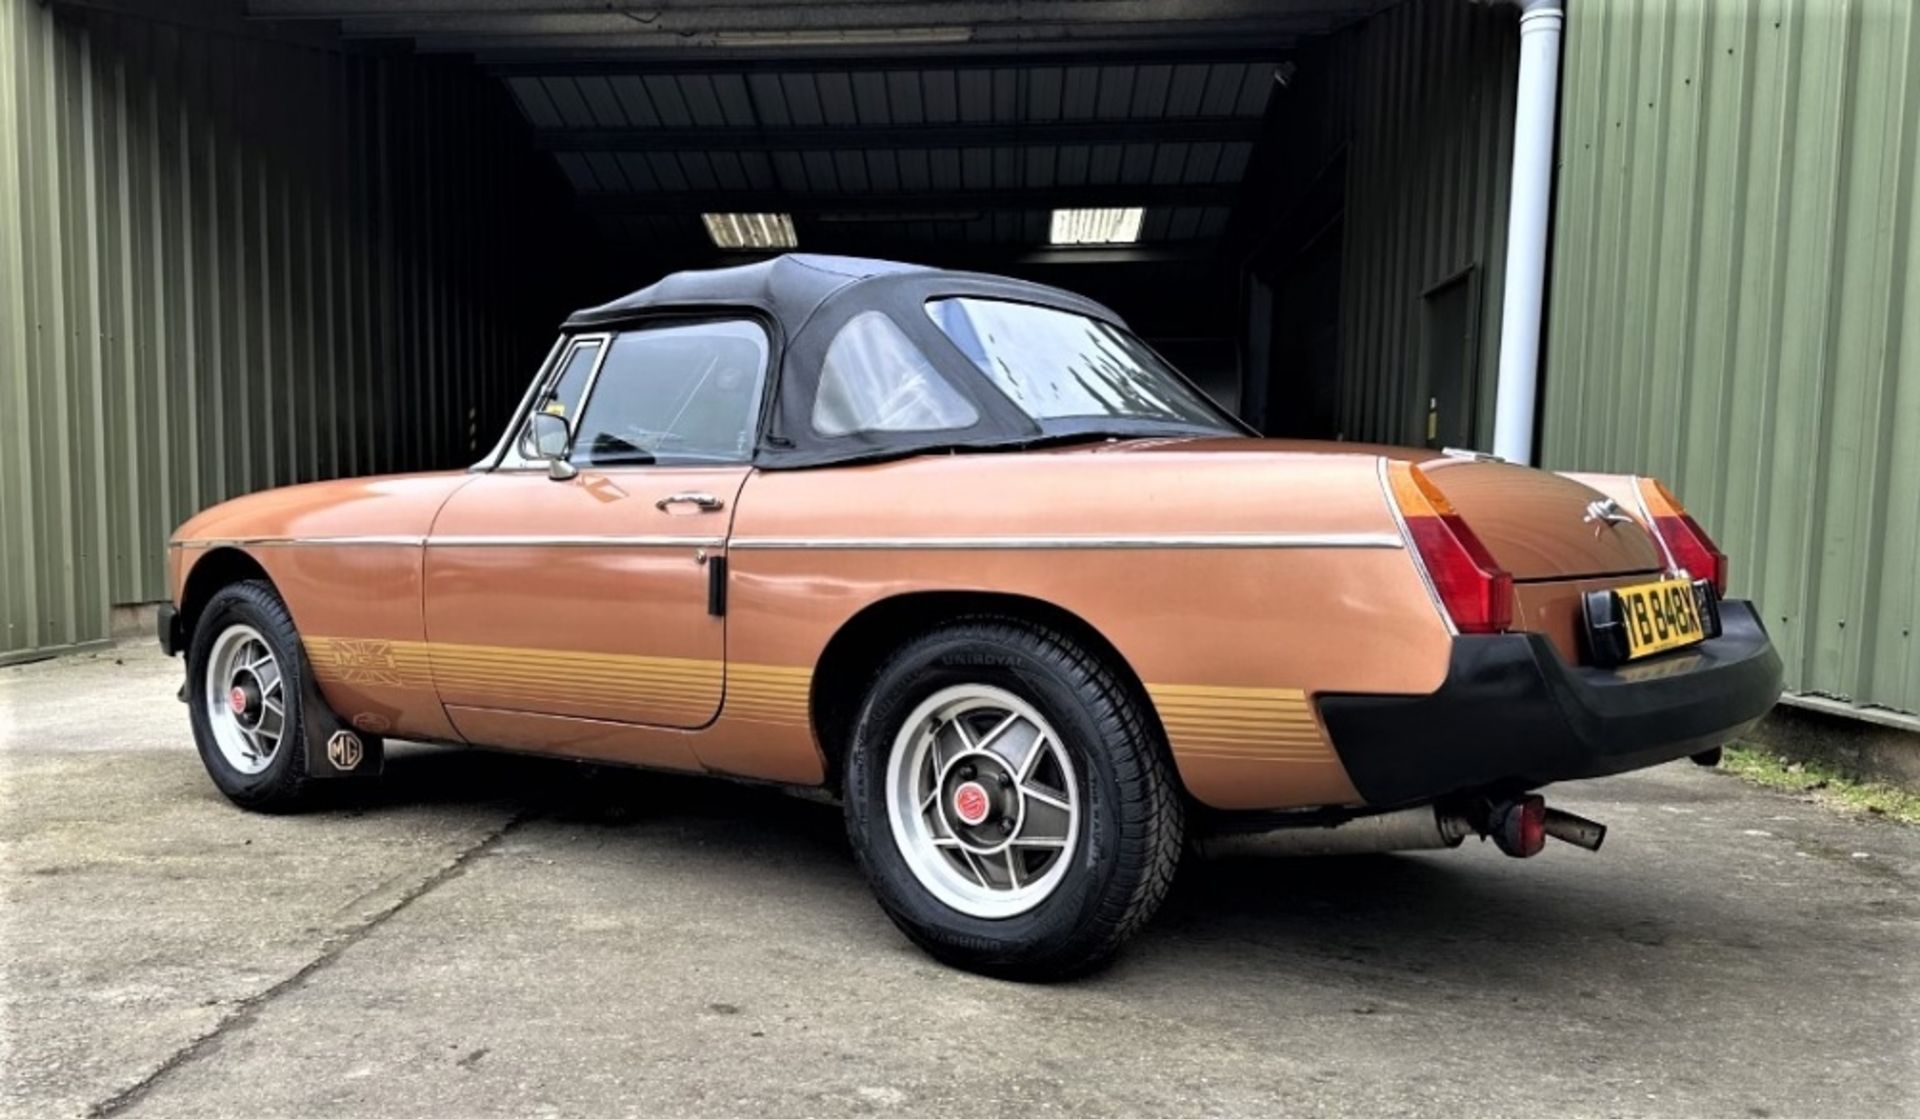 1981 MGB LE ROADSTER - offered at No Reserve Registration Number: DYB 848X Chassis Number: - Image 3 of 16